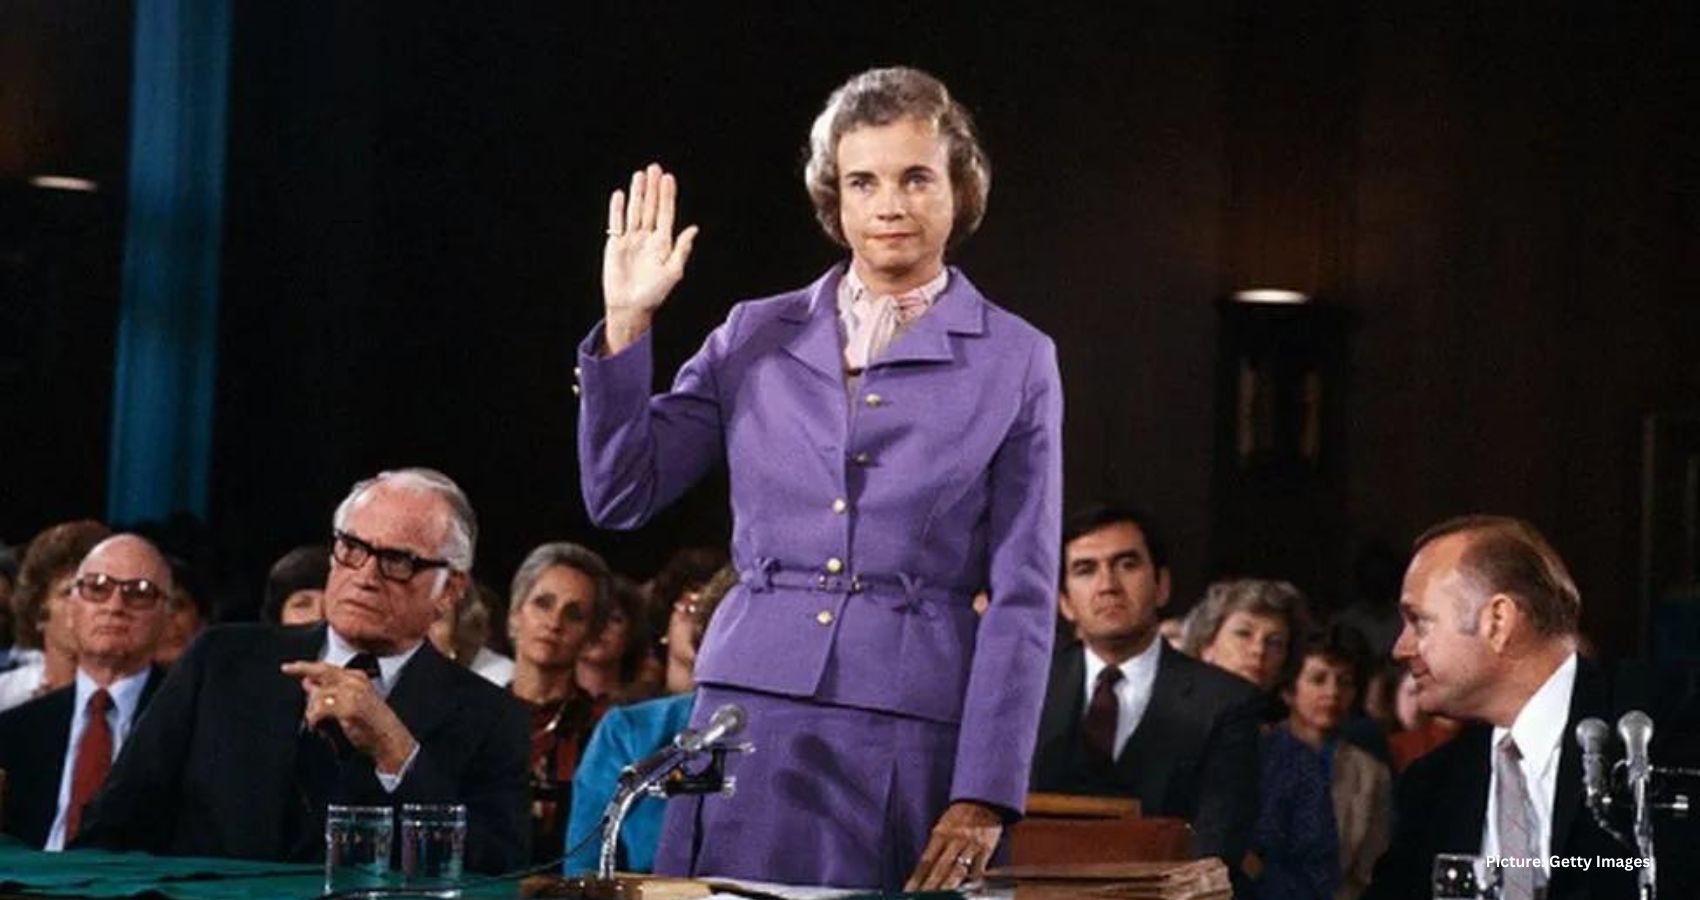 Featured & Cover Supreme Court Justice Sandra Day O'Connor blazed a trail for women in law